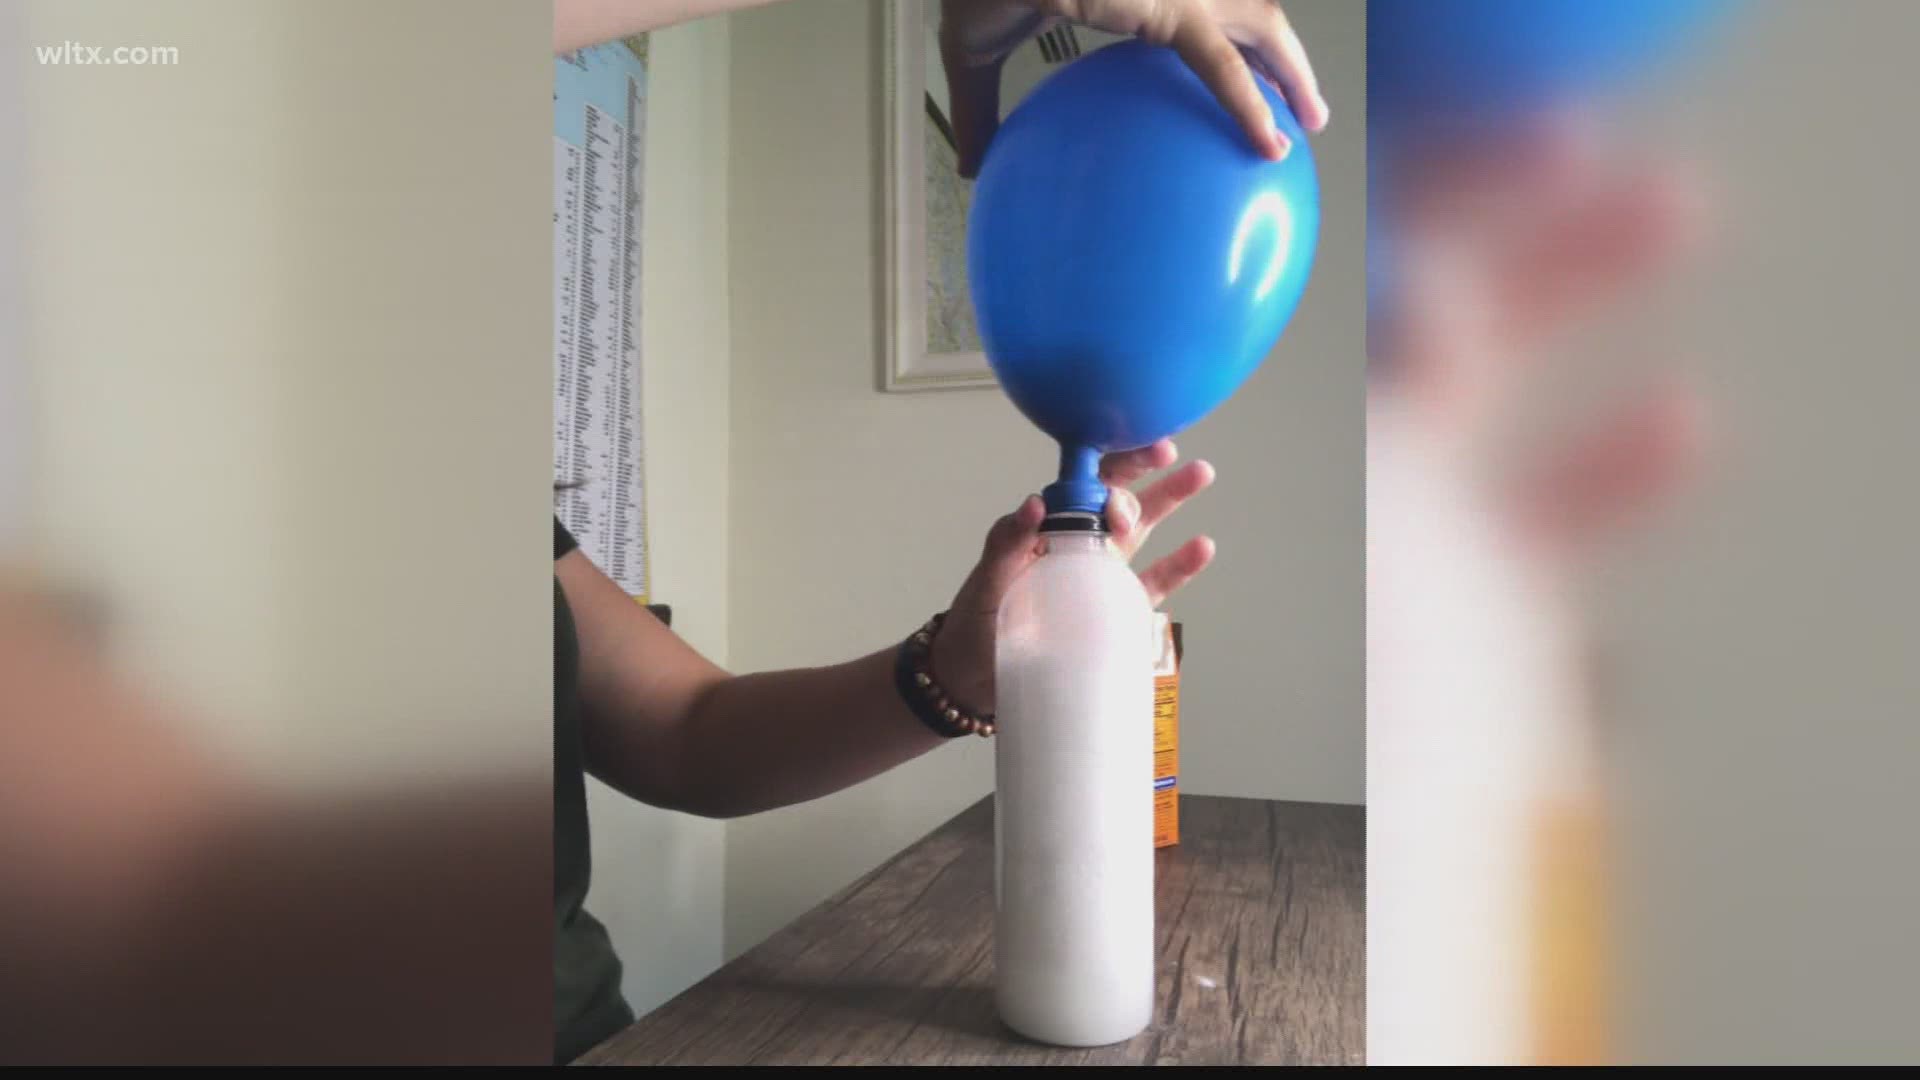 There are many gases in our atmosphere, including carbon dioxide. Learn how to create CO2 with a chemical reaction and blow up a balloon.